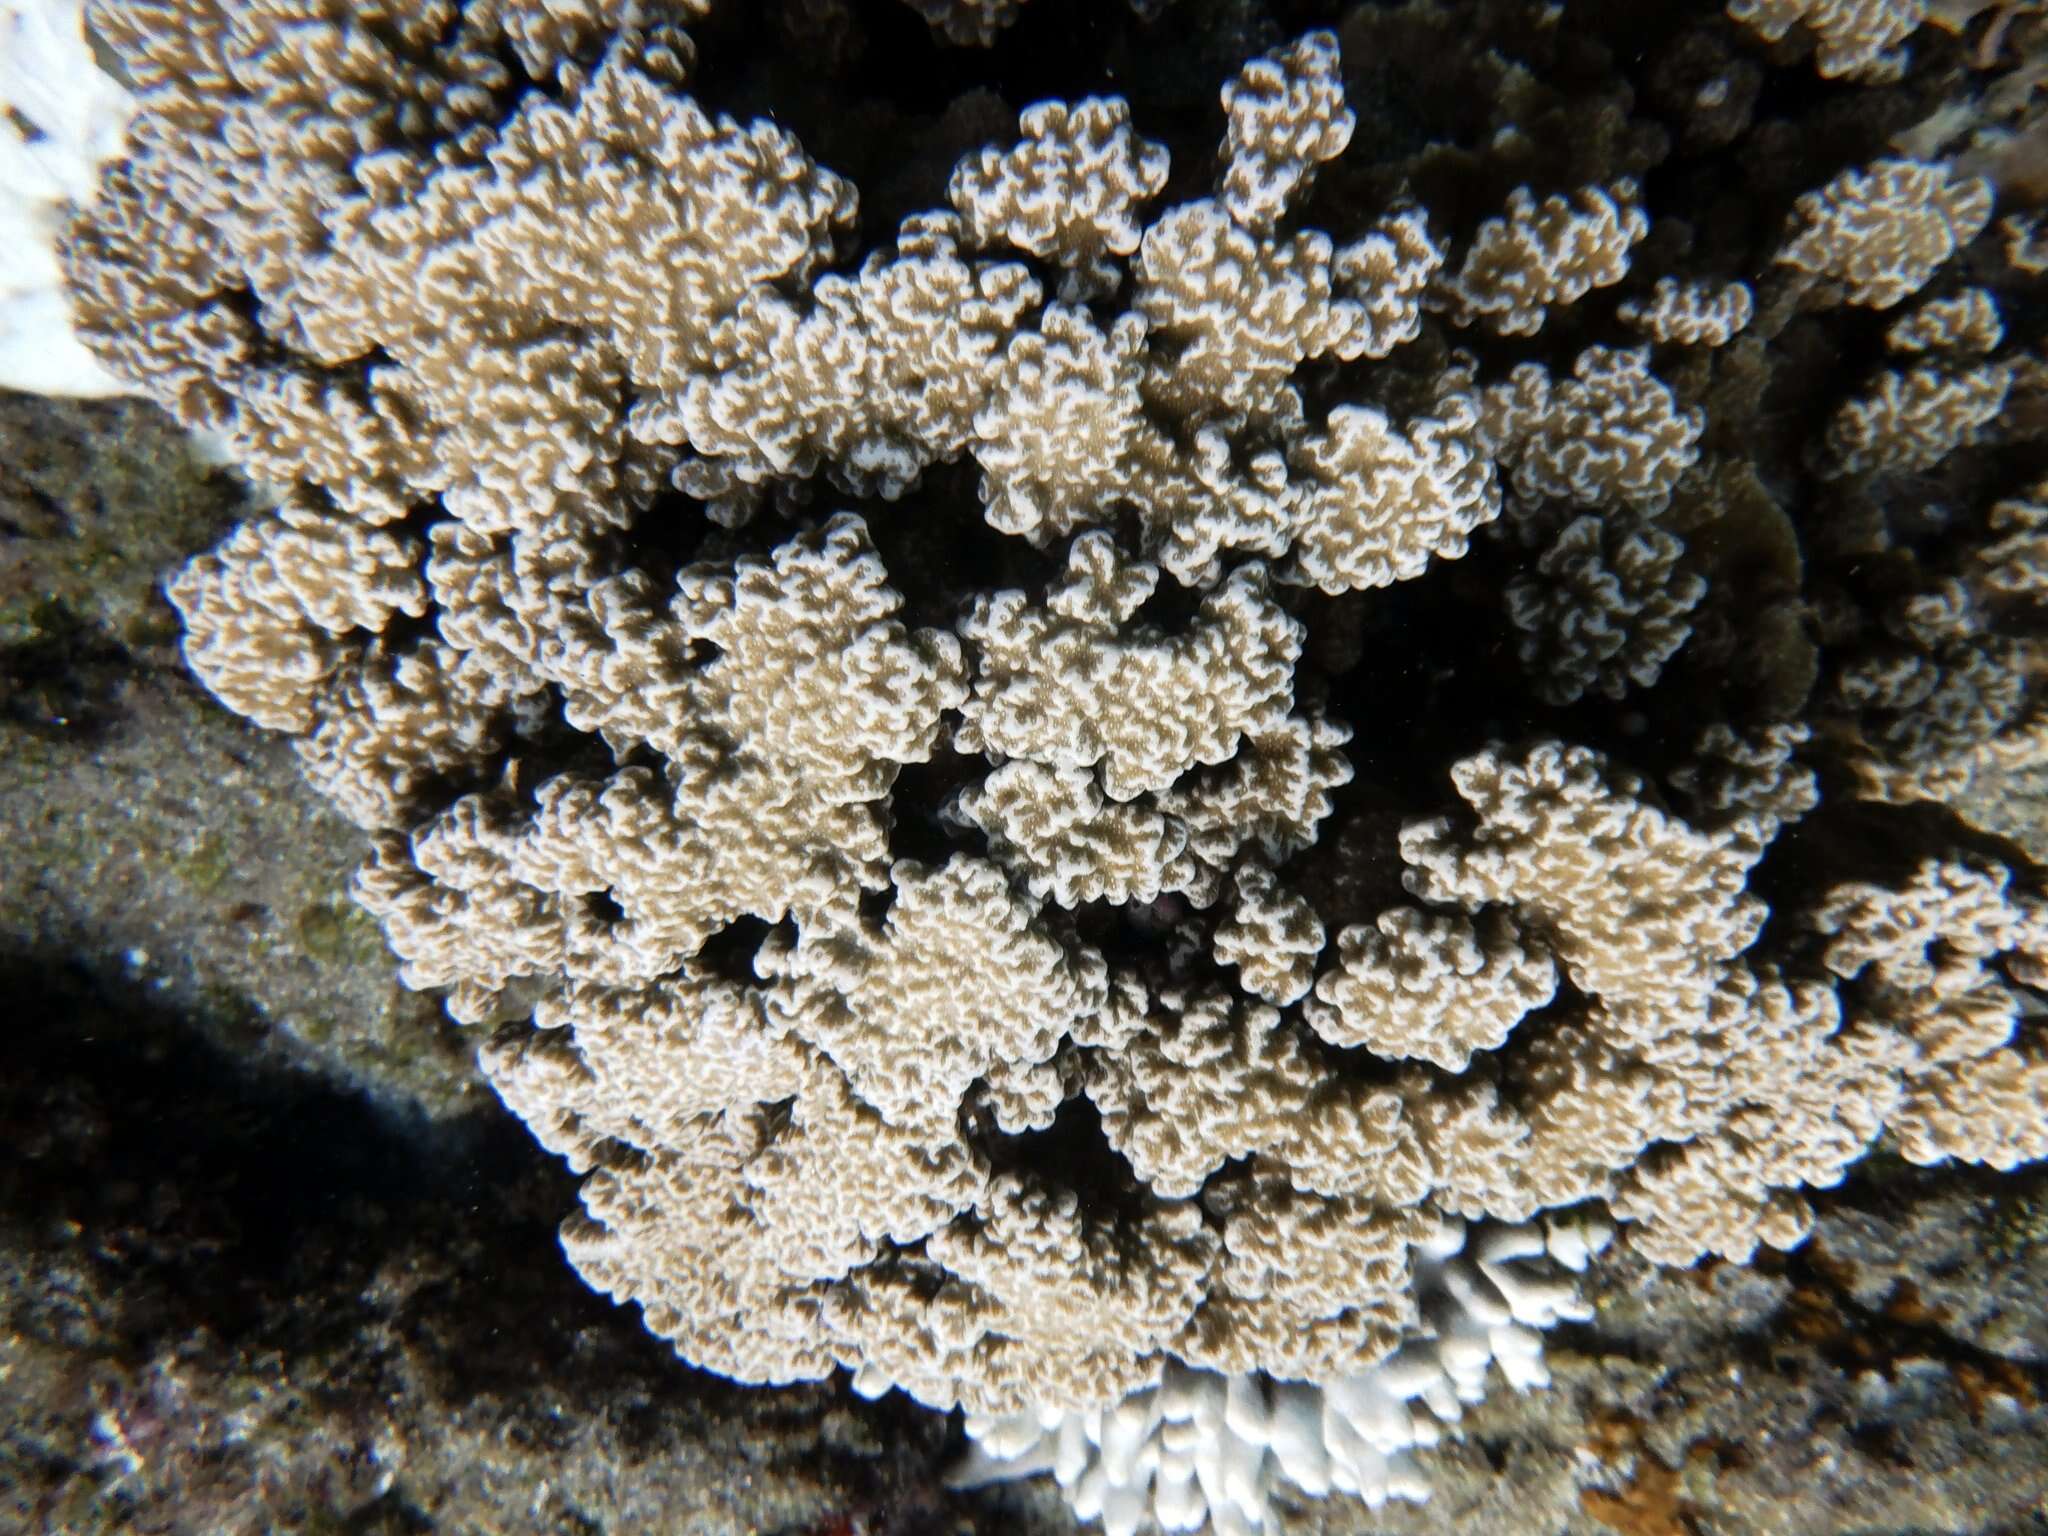 Image of Column coral